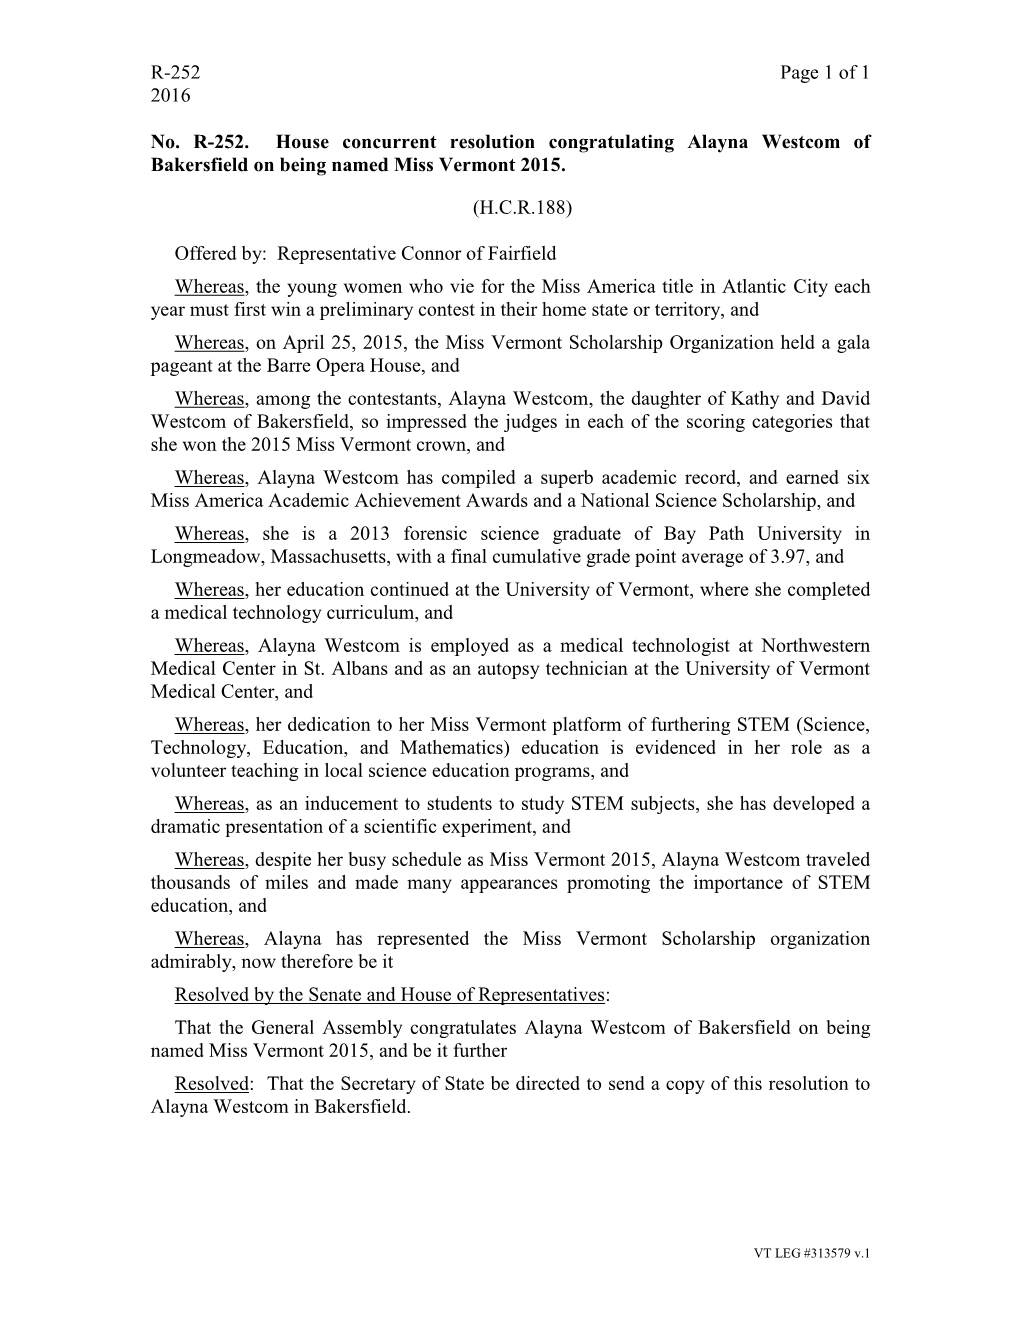 R-252 Page 1 of 1 2016 No. R-252. House Concurrent